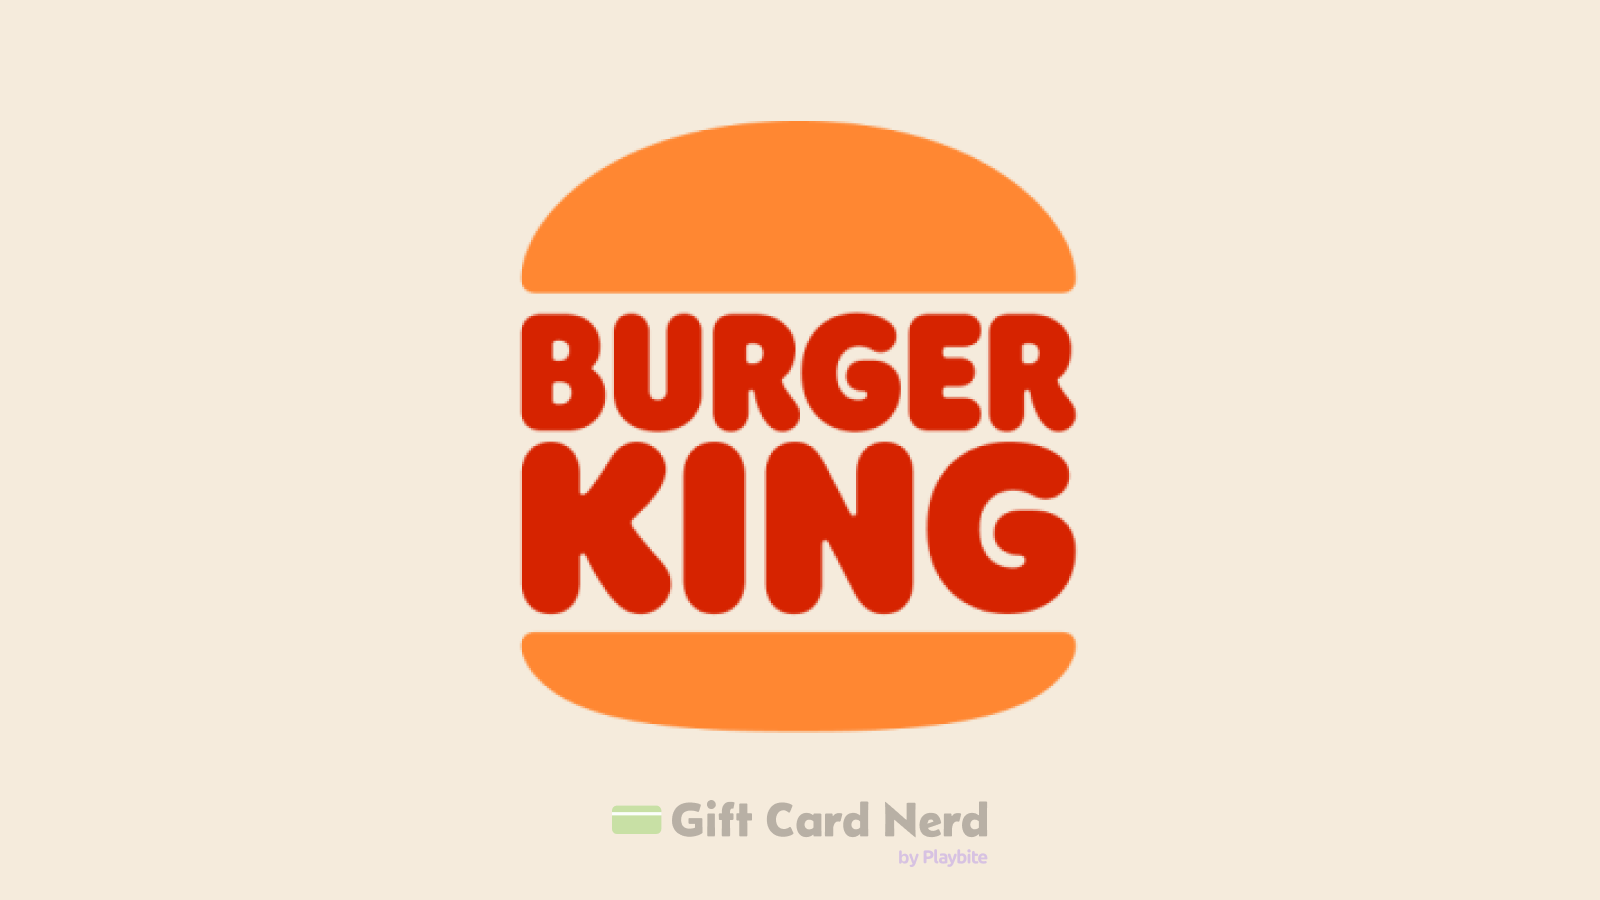 Can I Use a Burger King Gift Card on Uber Eats?